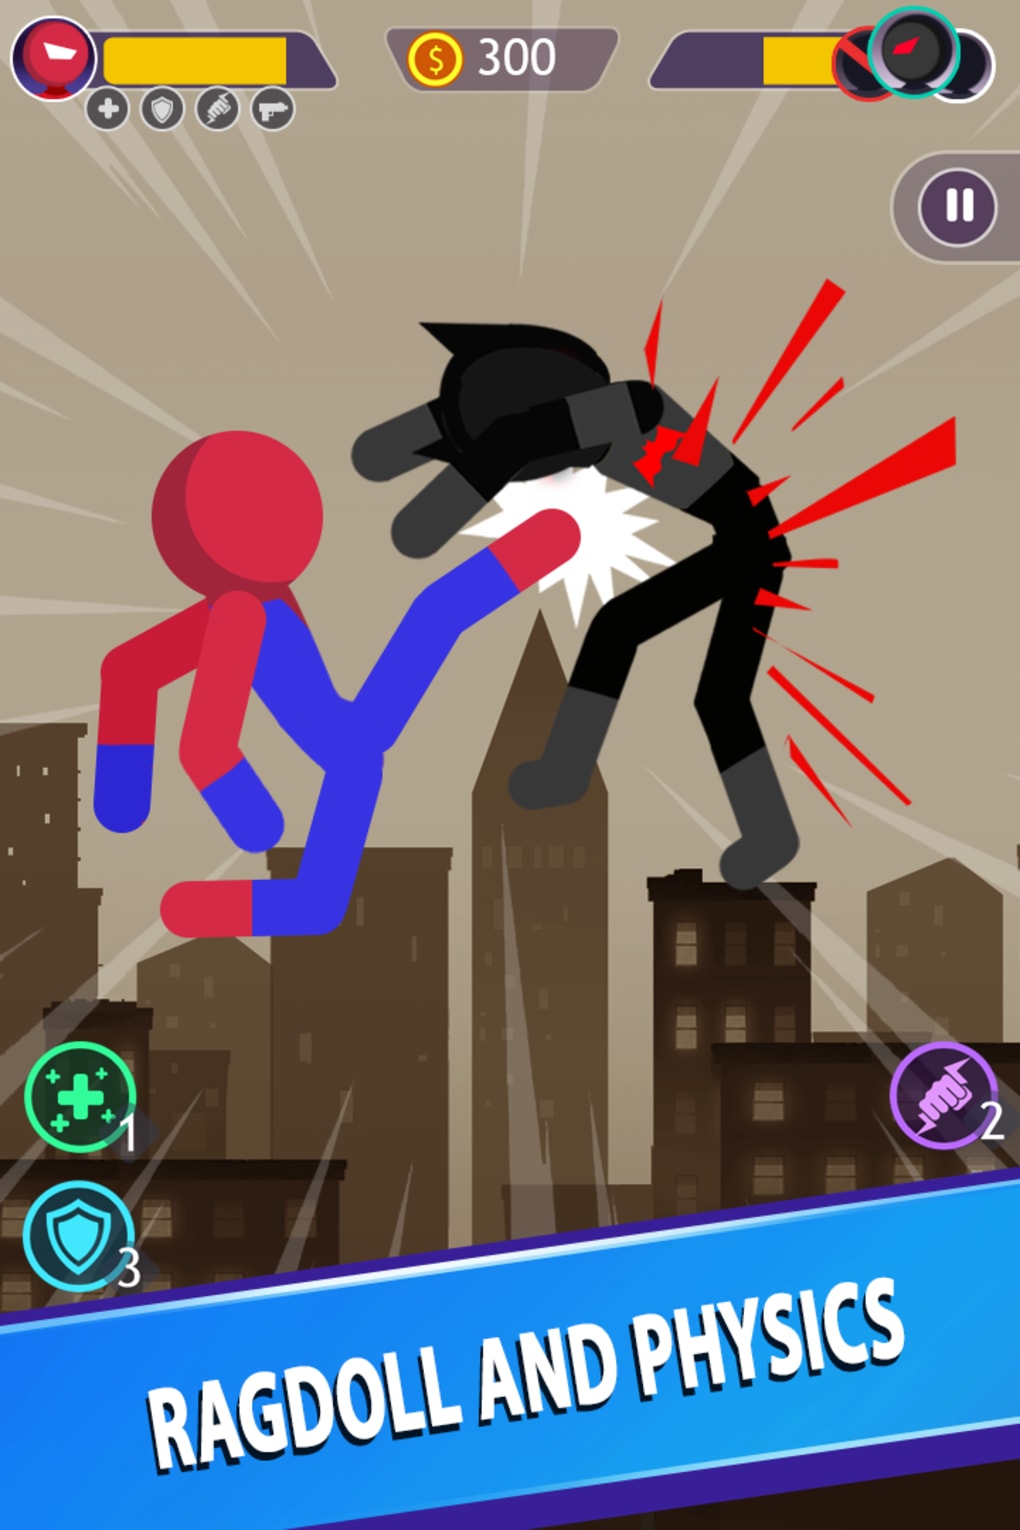 Download Stickman Battle Fight Mod Apk v3.5 Latest On Android